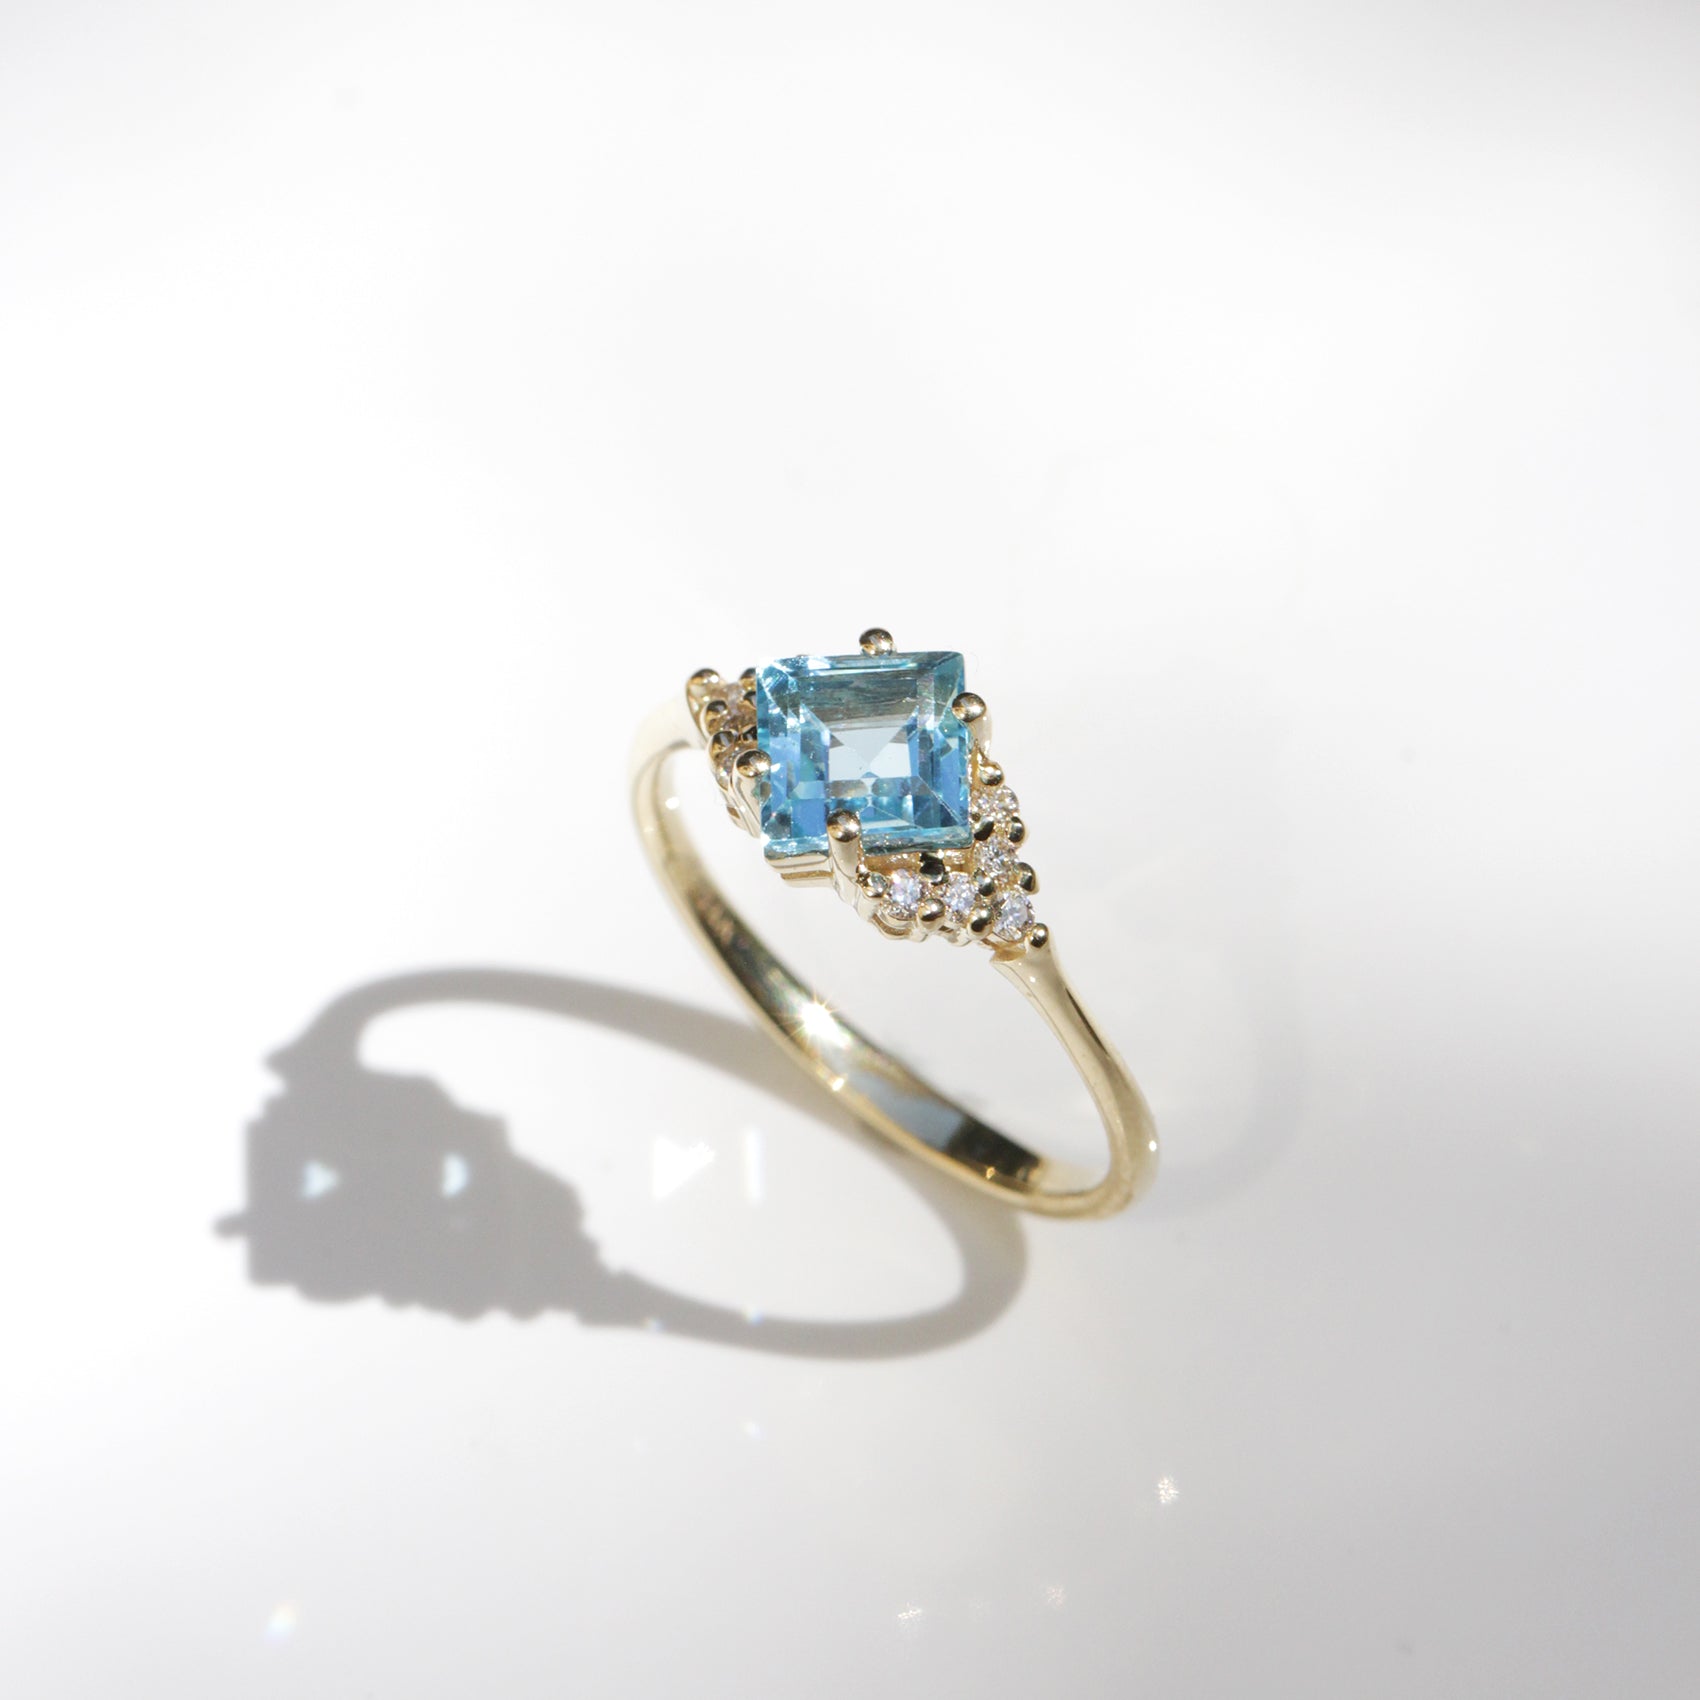 Juliette Ring With Diamonds and Blue Topaz - Swiss